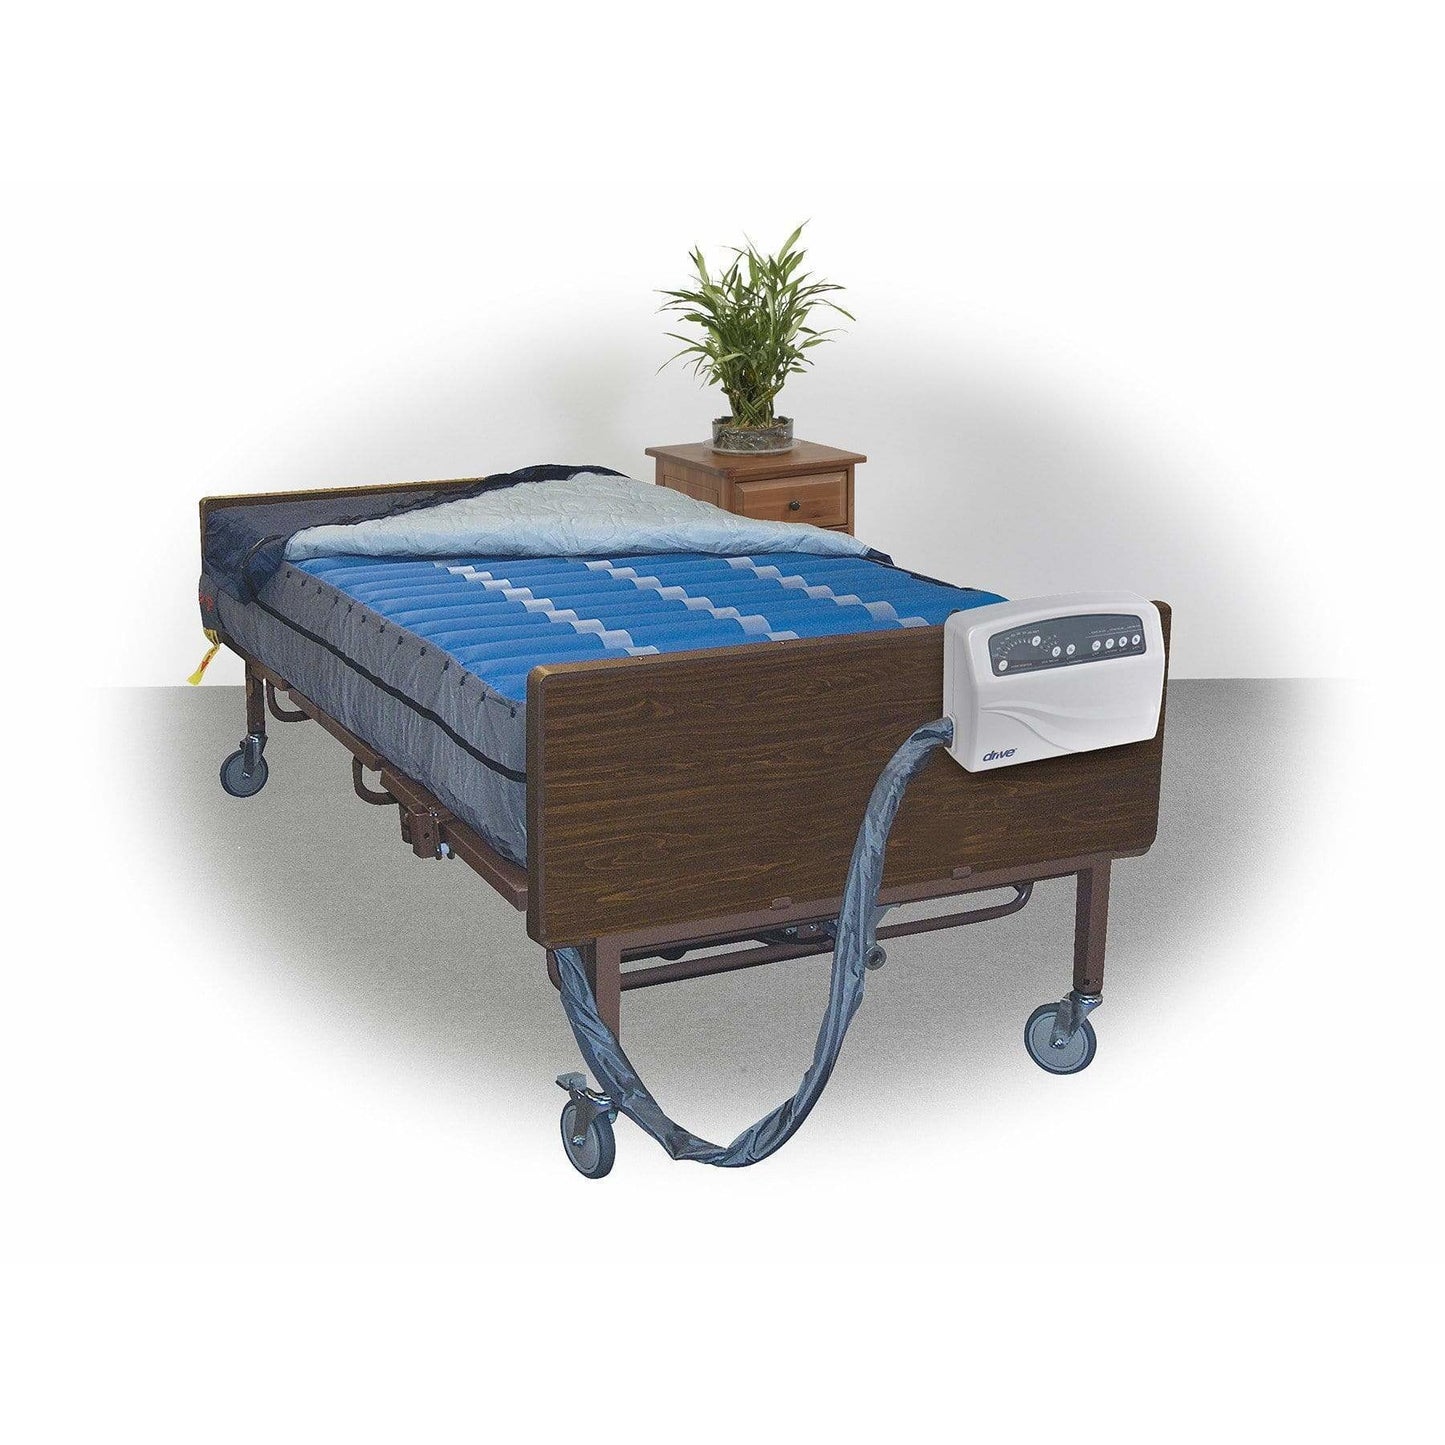 ConvaQuip Mattresses Med-Aire Plus Bariatric Alternating Pressure and Low Air Loss Mattress Model DR14030 by ConvaQuip